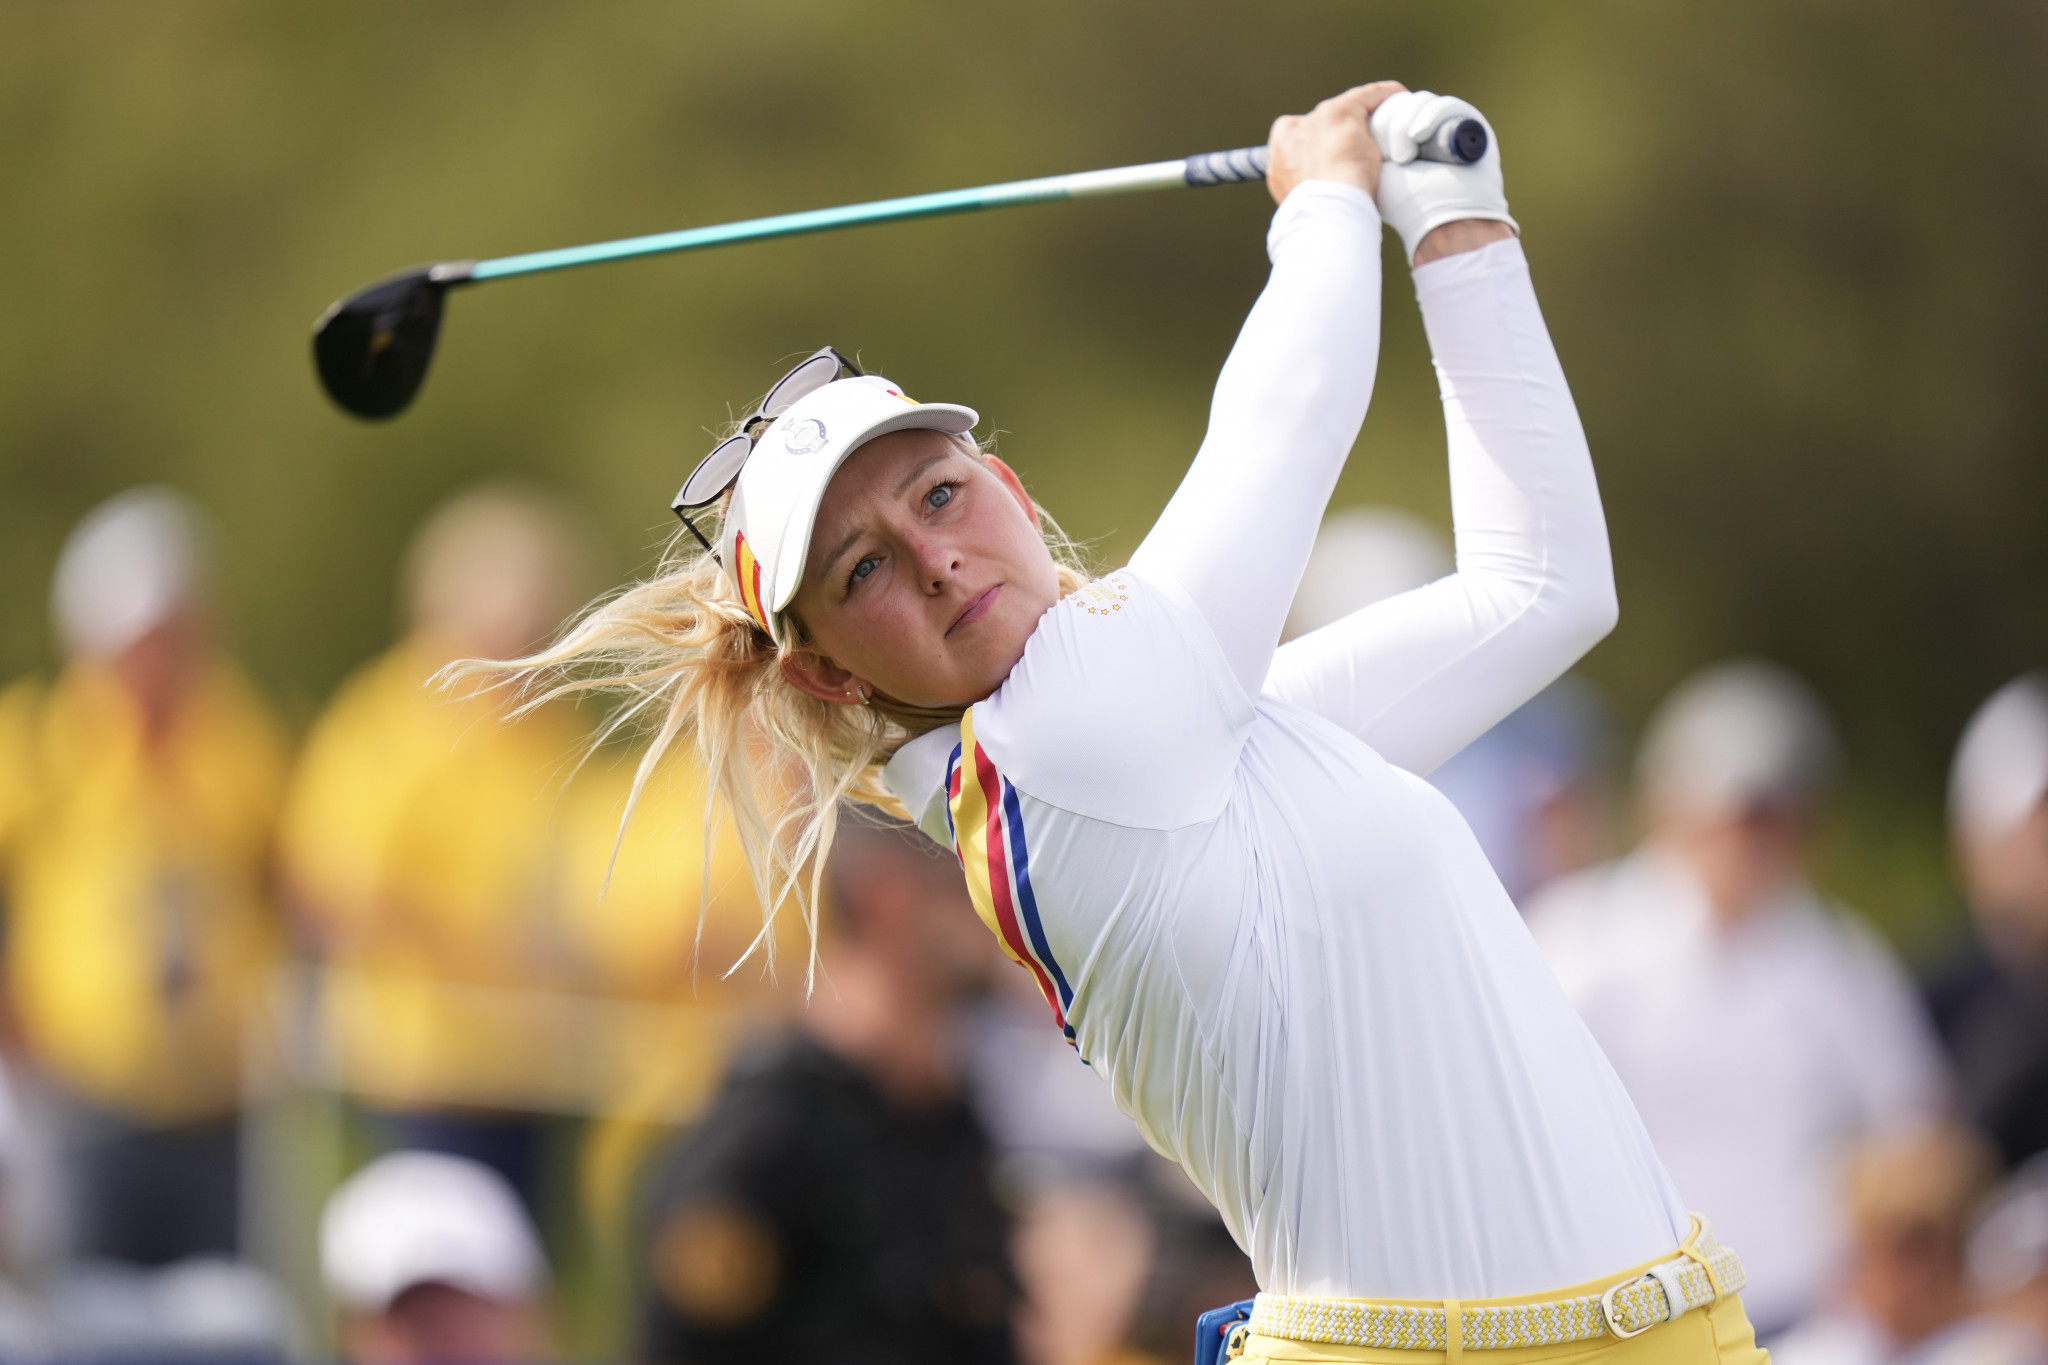 Europe's Danish player Emily Kristine Pedersen struck only the second hole-in-one in Solheim Cup history ©Getty Images